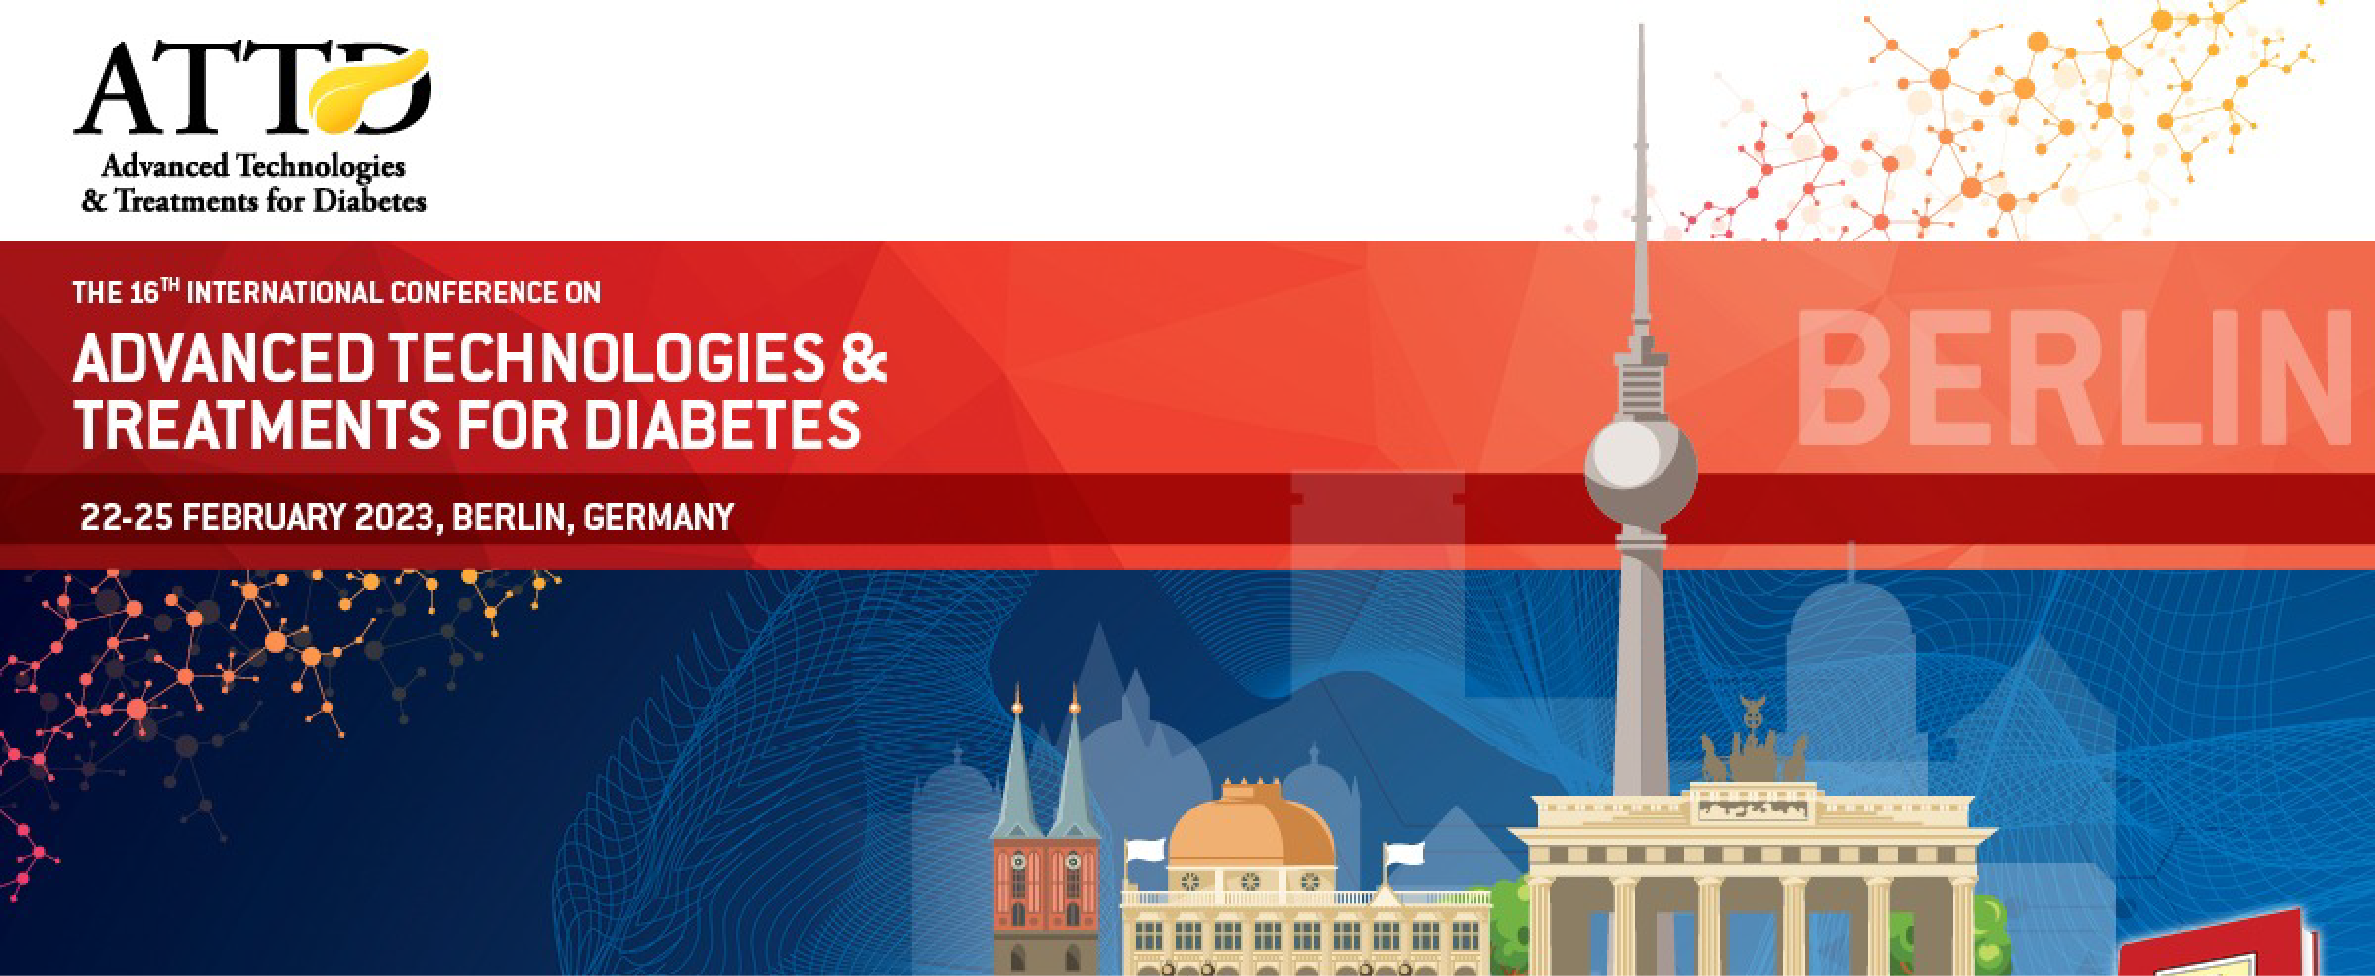 16th International Conference on Advanced Technologies & Treatments for Diabetes - ATTD 2023